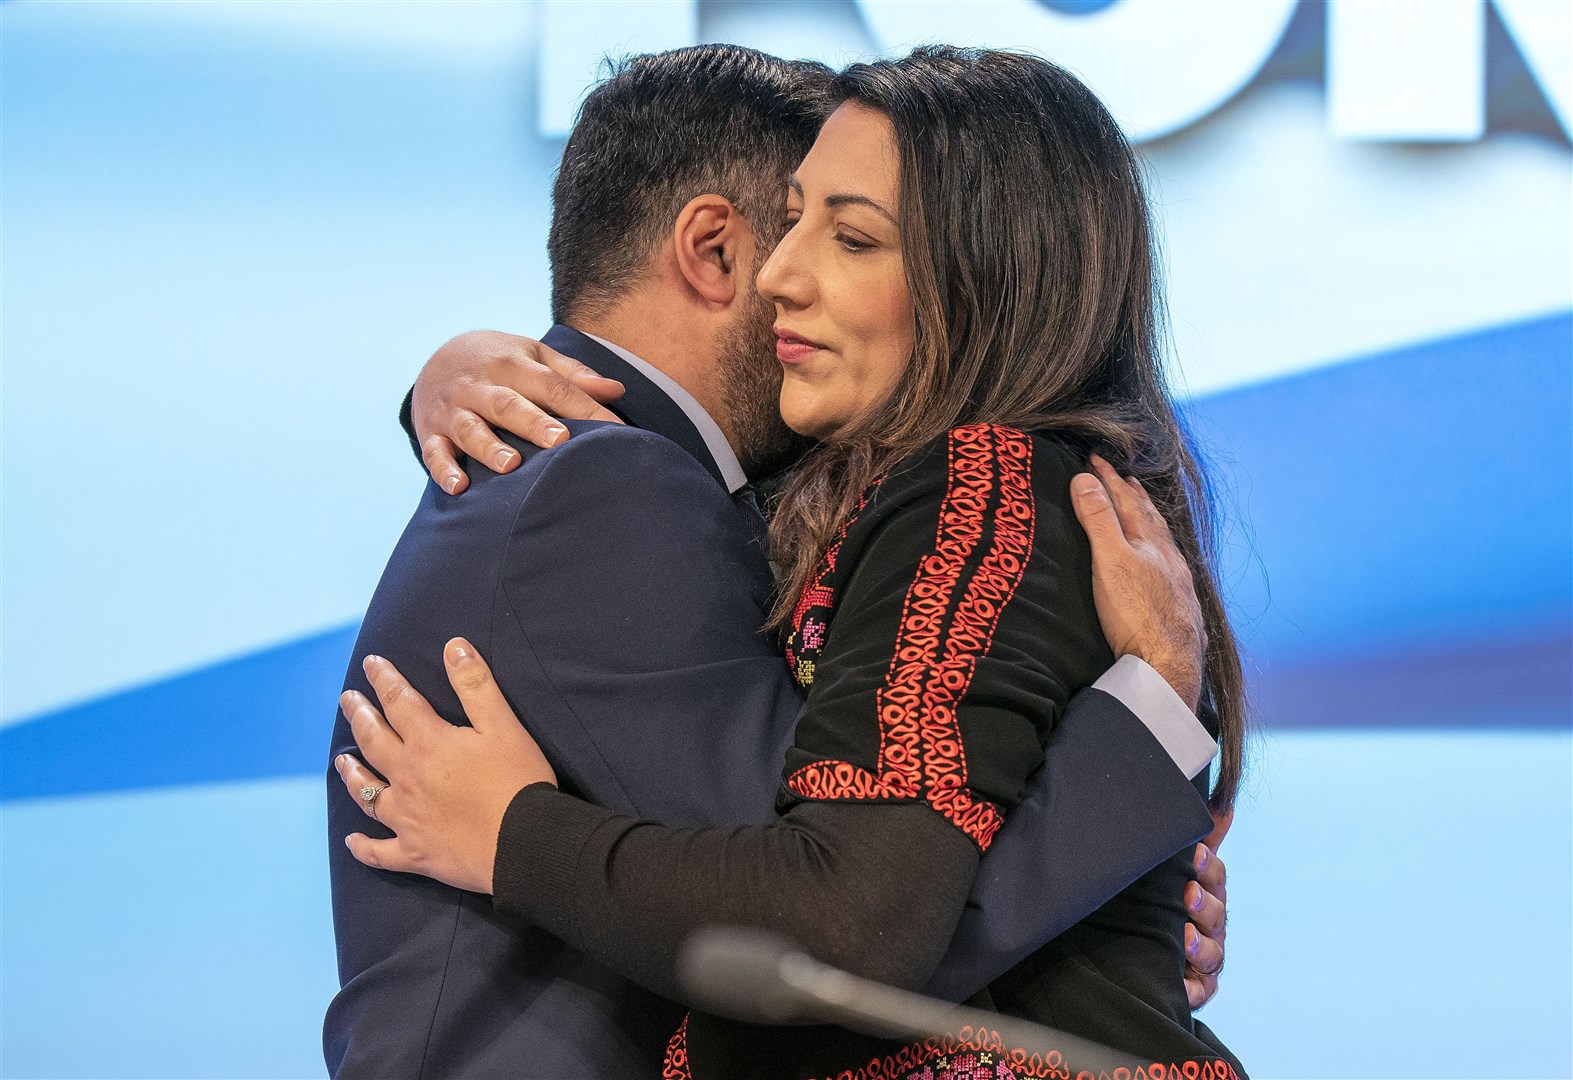 Nadia El-Nakla was embraced by her husband Humza Yousaf on stage a the SNP conference (Jane Barlow/PA)